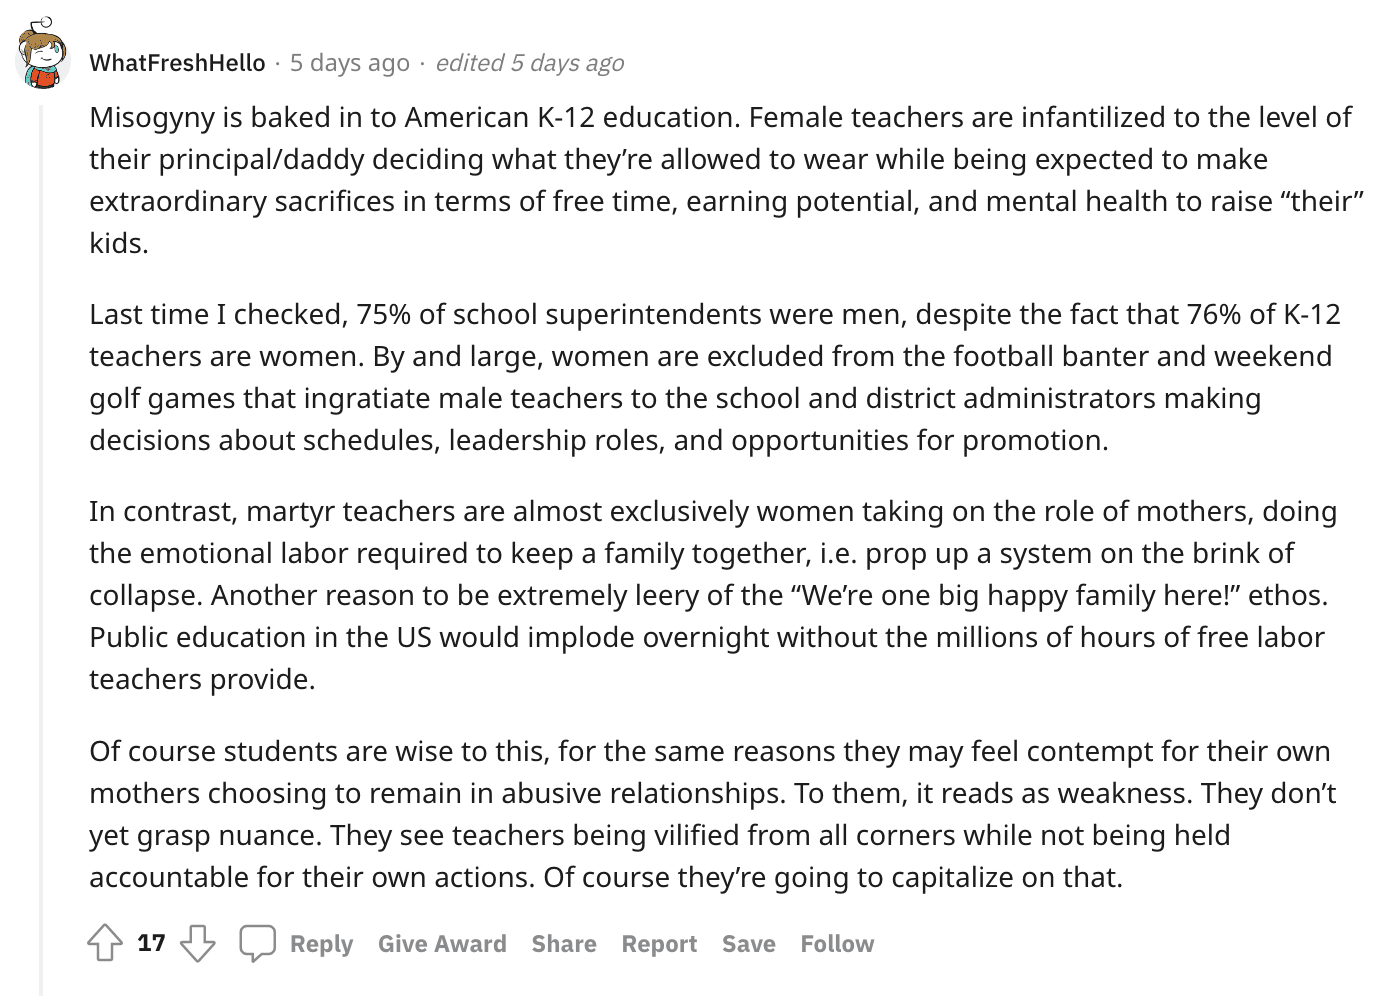 Screenshot from a reddit post on whether women teachers are treated worse